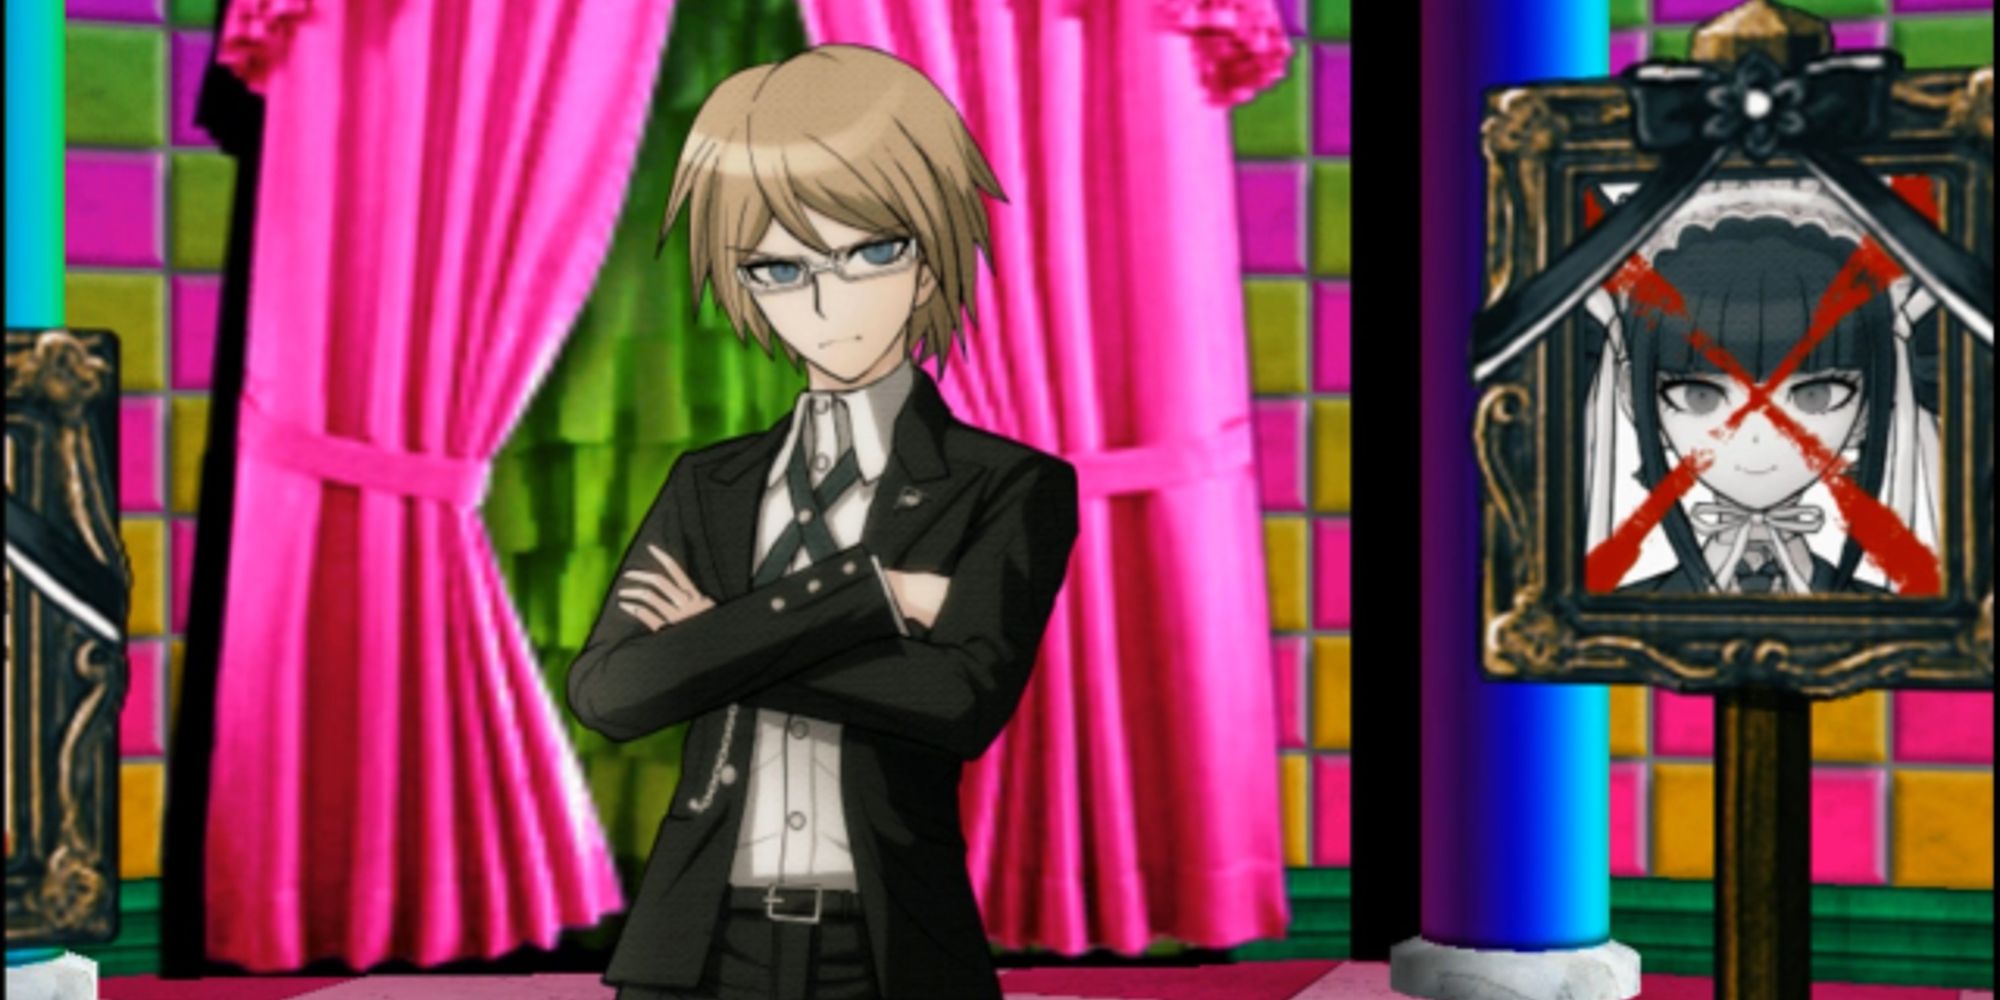 byakuya standing next to portrait of celeste during trial